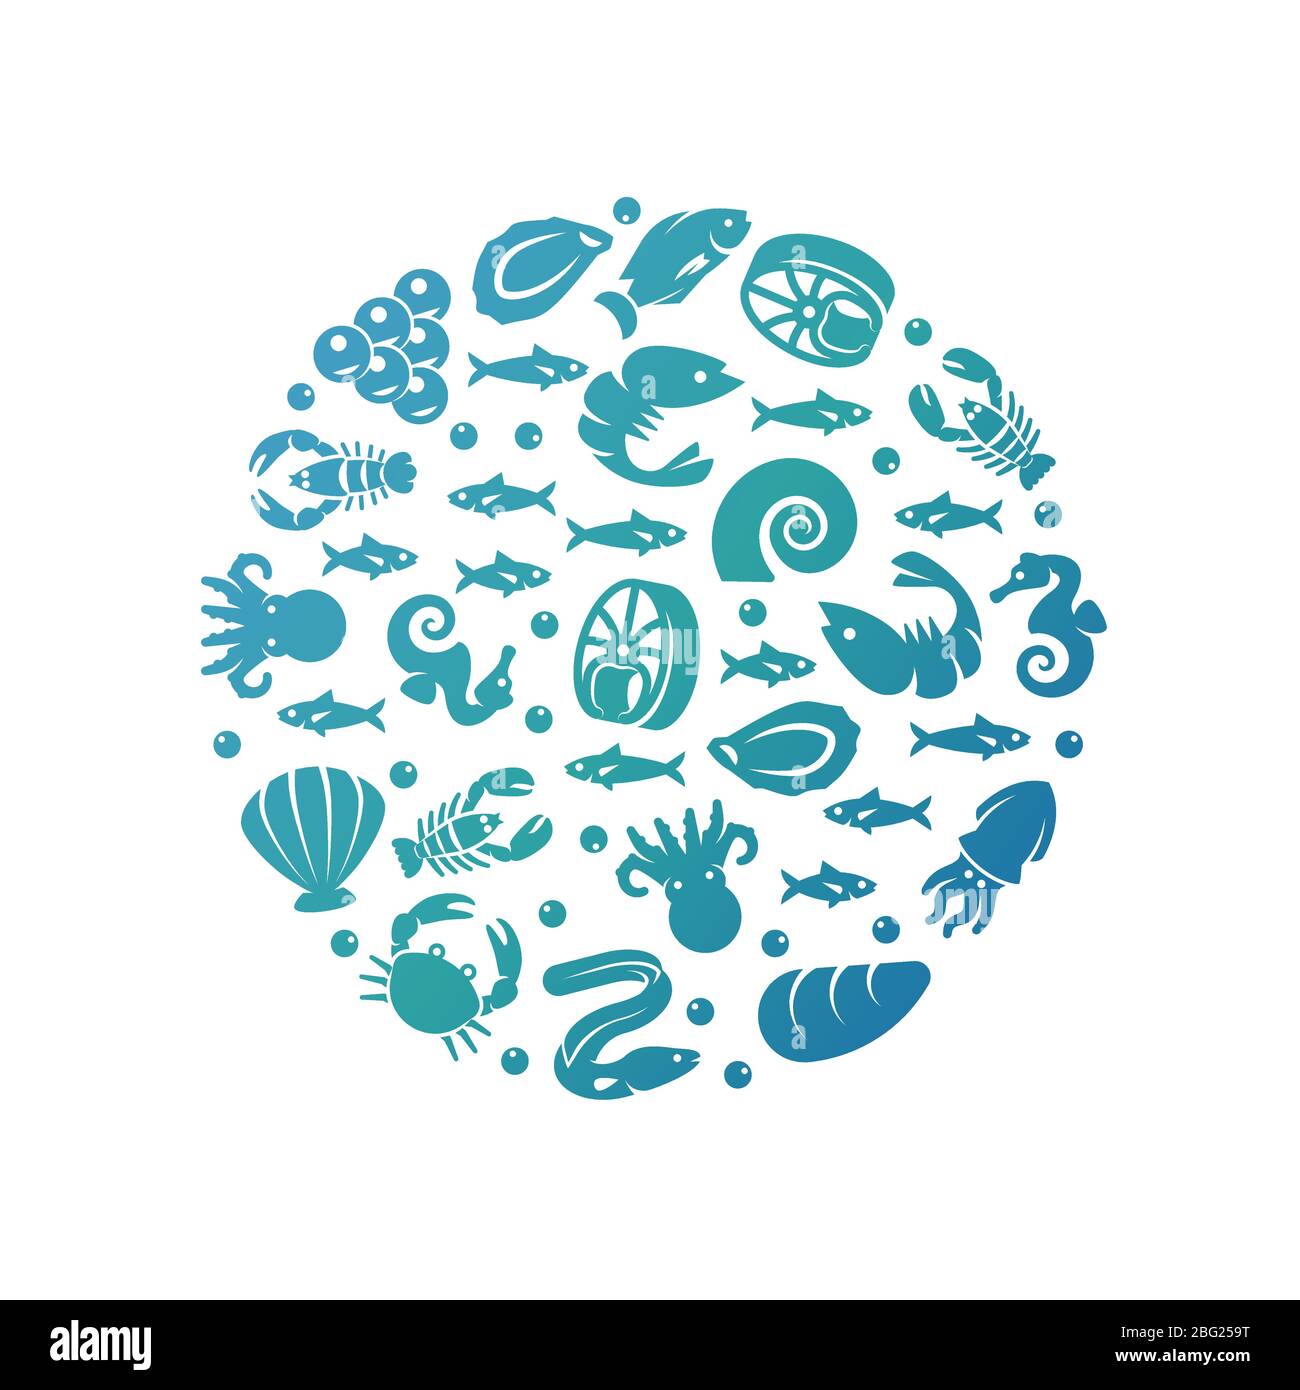 Ocean life colorful round concept - sea food emblem design. Sea and ocean fish, underwater animal and seafood. Vector illustration Stock Vector